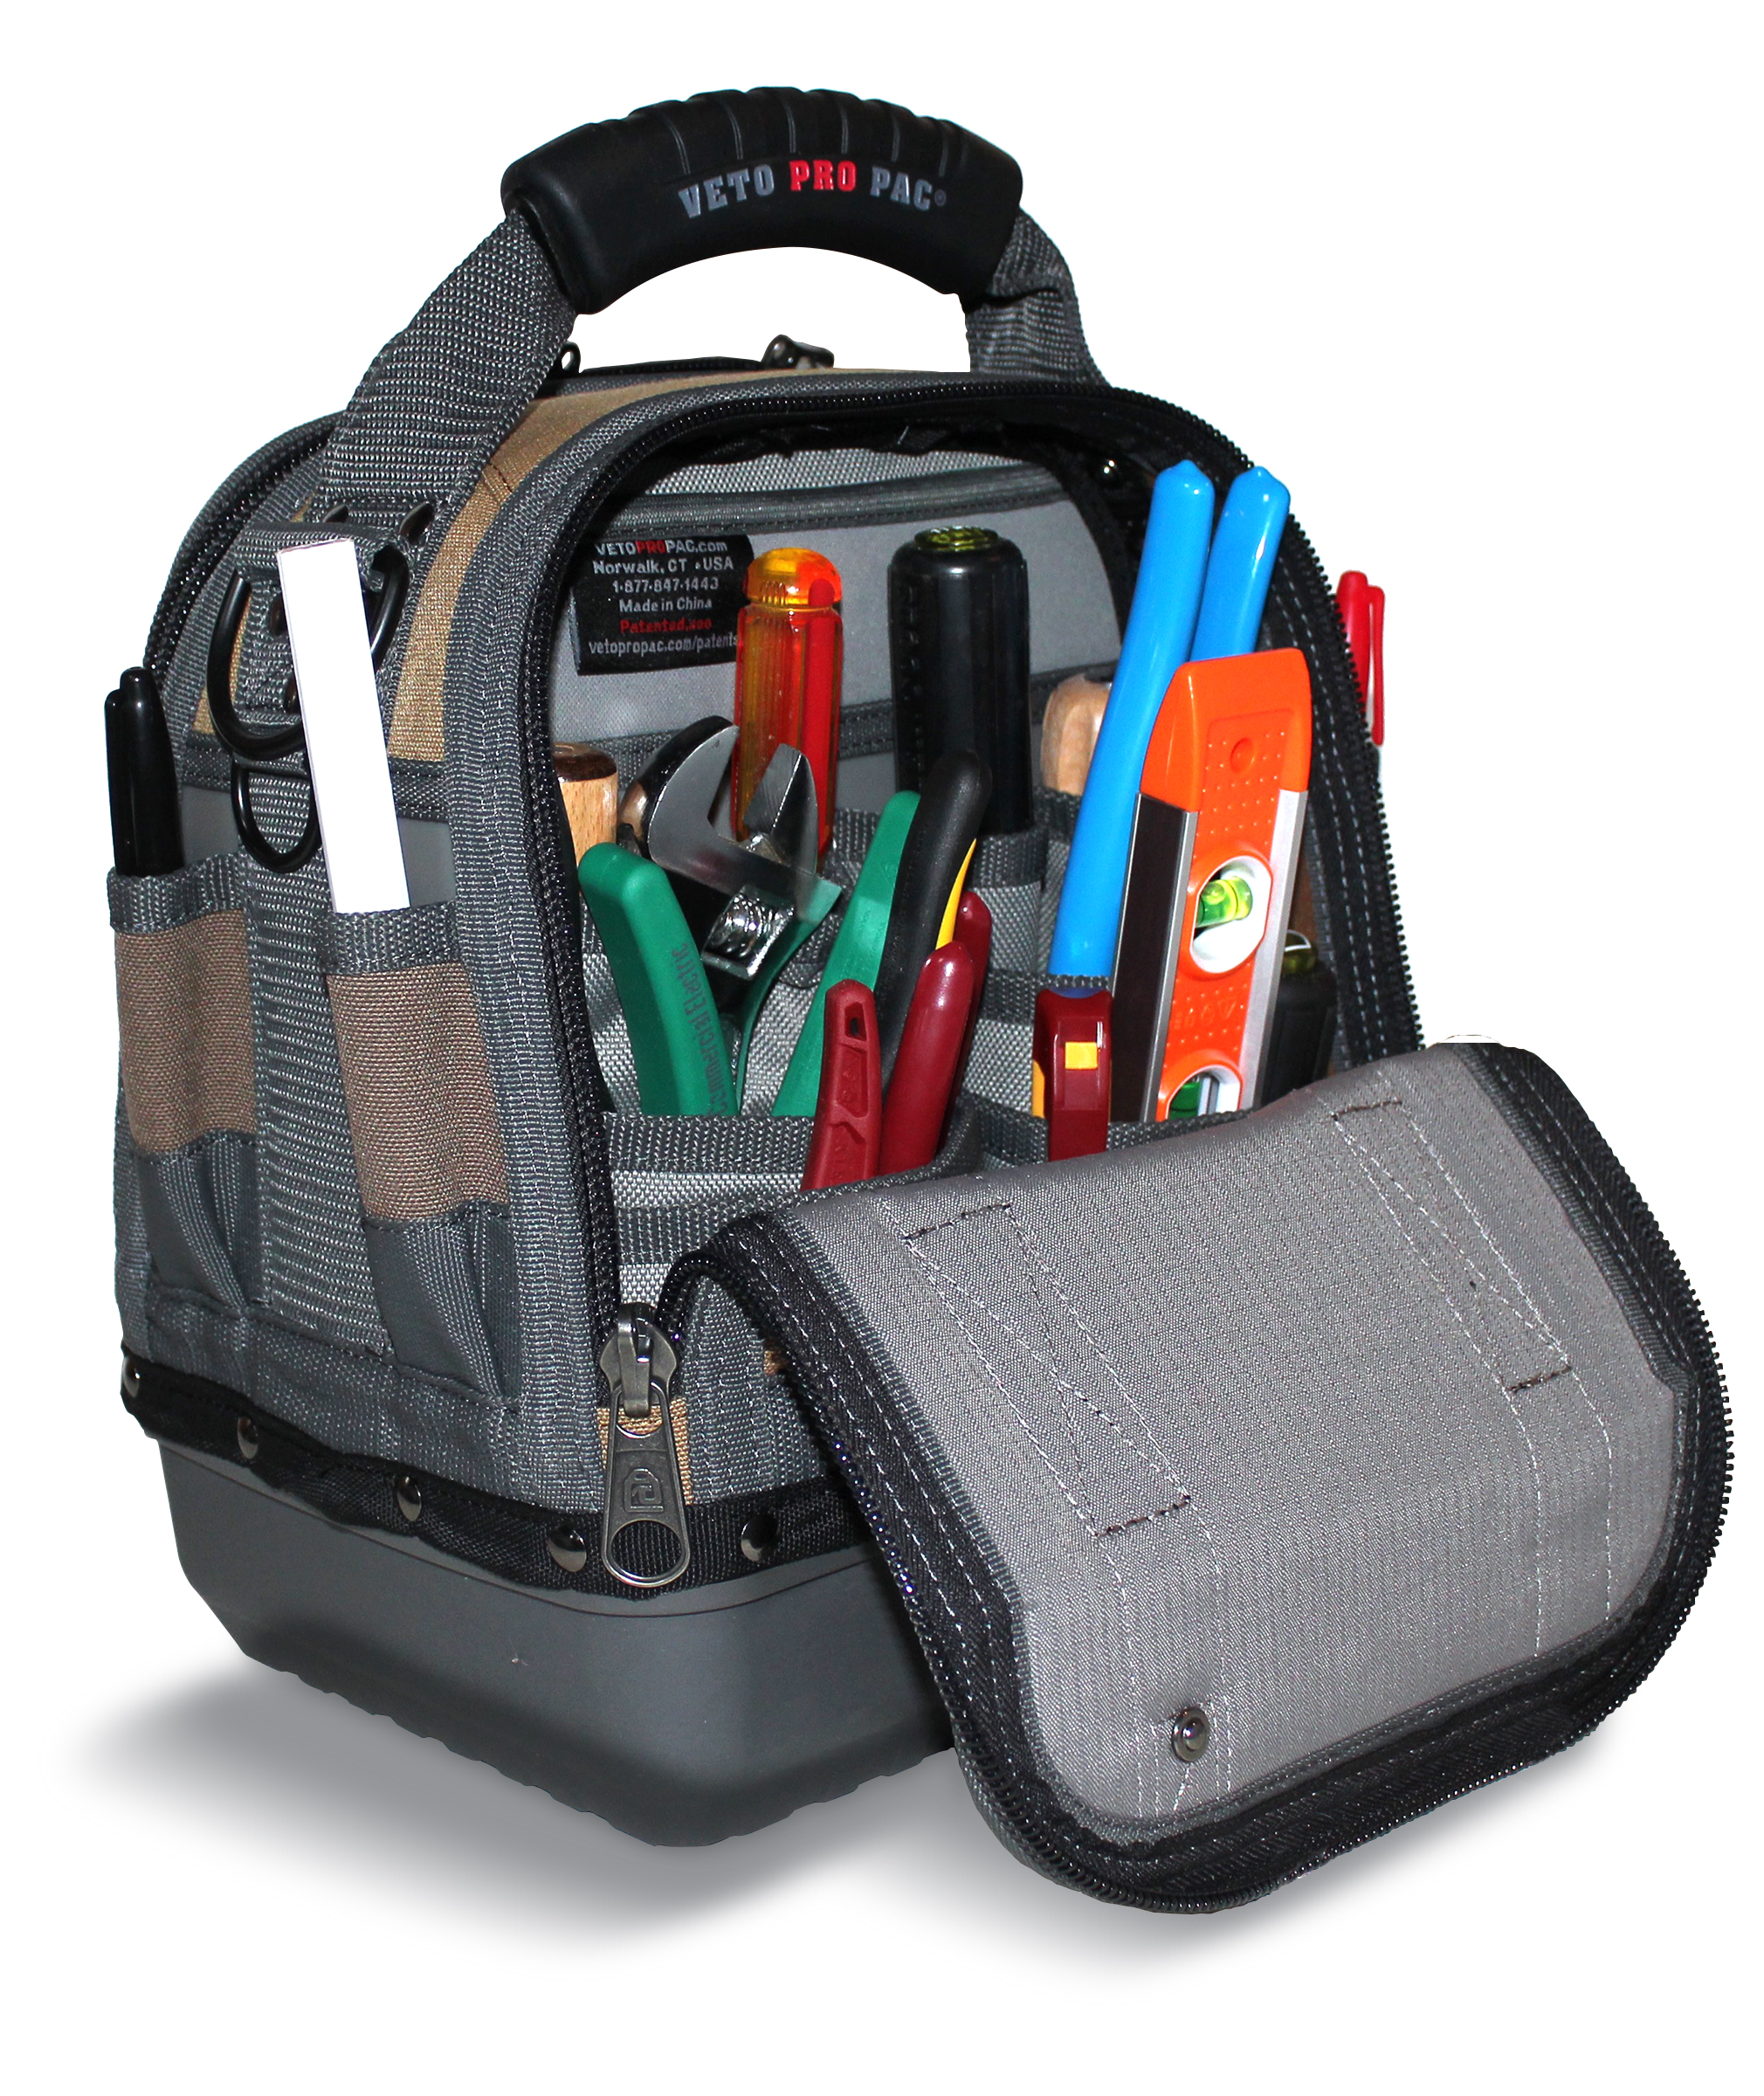 Veto Pro Pac OT-XL Extra Large Open Top Tool Bag - Shelter Institute